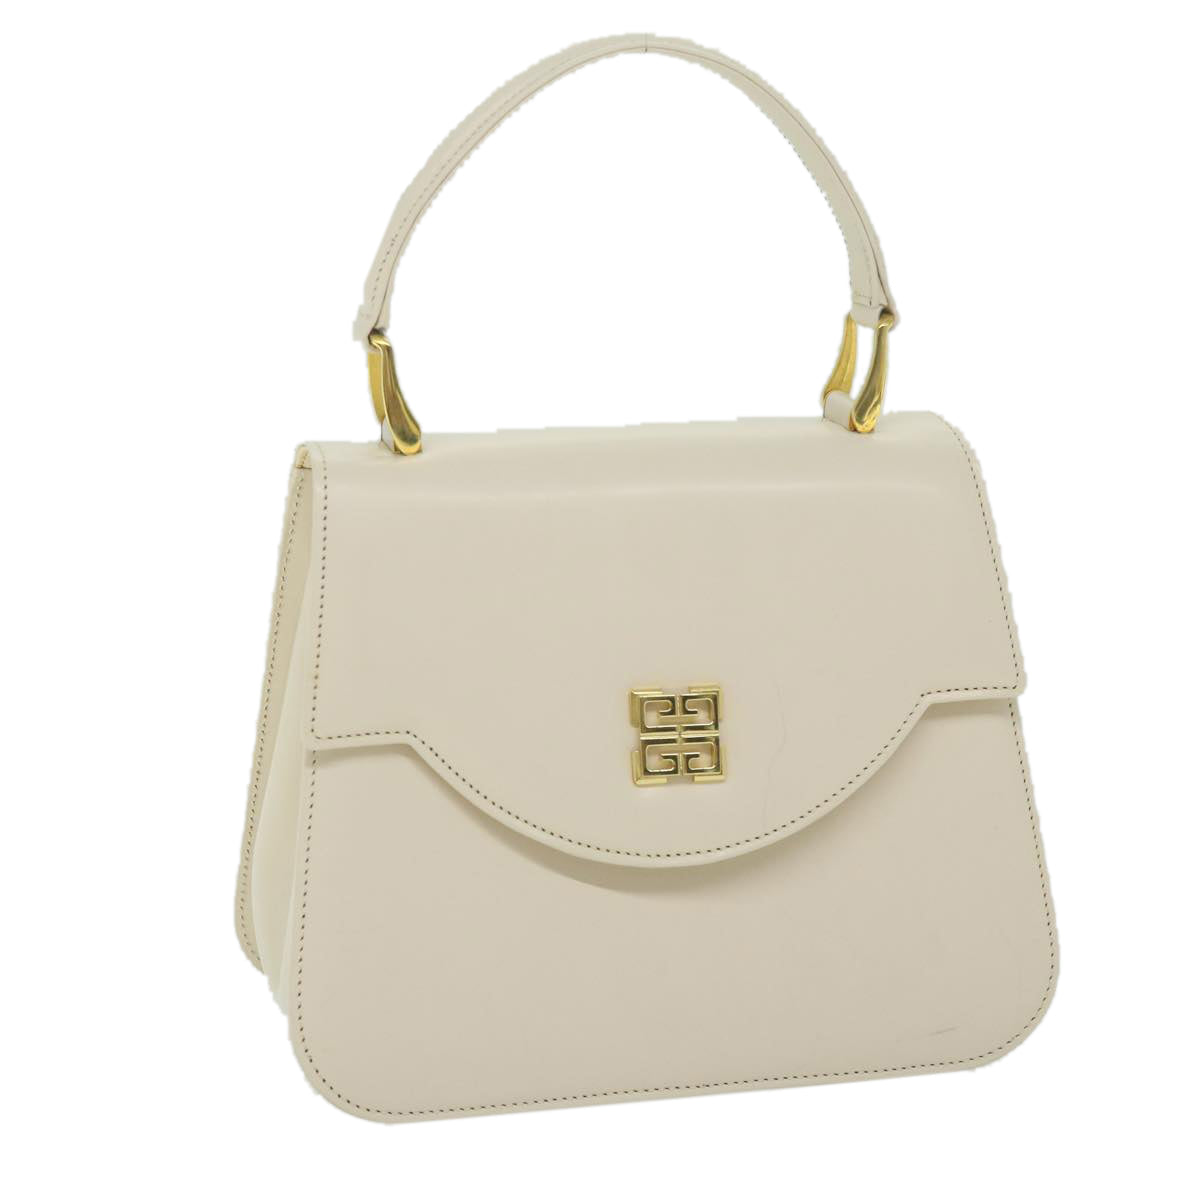 GIVENCHY Hand Bag Leather White Auth bs11606